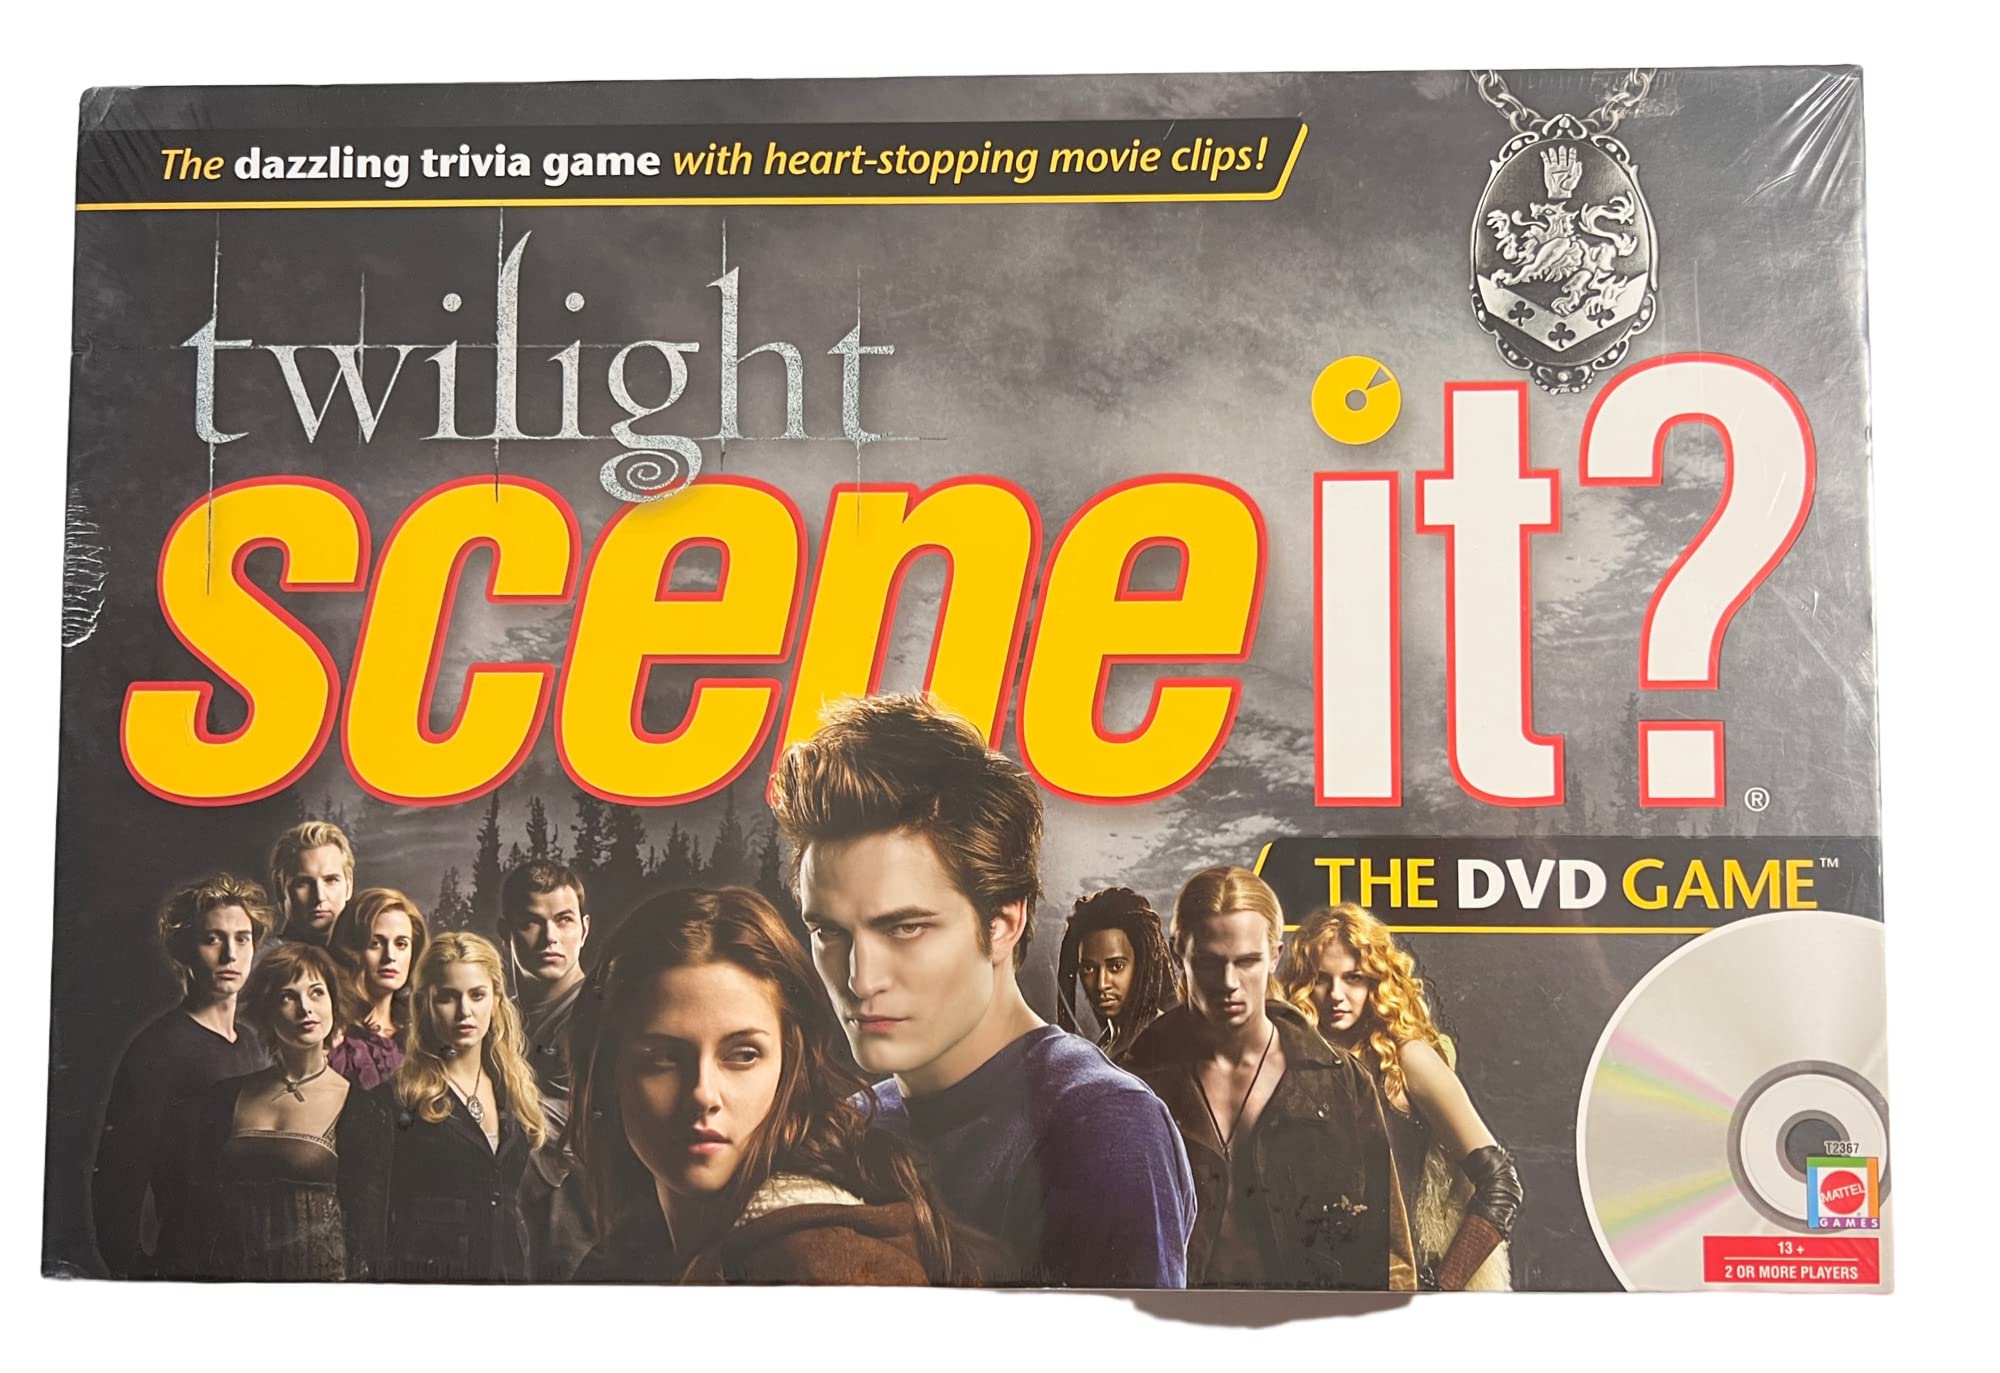 Scene It? Trivia DVD Board Game - TWILIGHT with DVD, Game Board, 4 Movers, 100 Trivia Cards, 20 Fate Cards, 4 Category Reference Cards, 1 Six-Sided Numbered Die, 1 Eight-Sided Category Die and Instruction Sheet Plus Bonus Activities